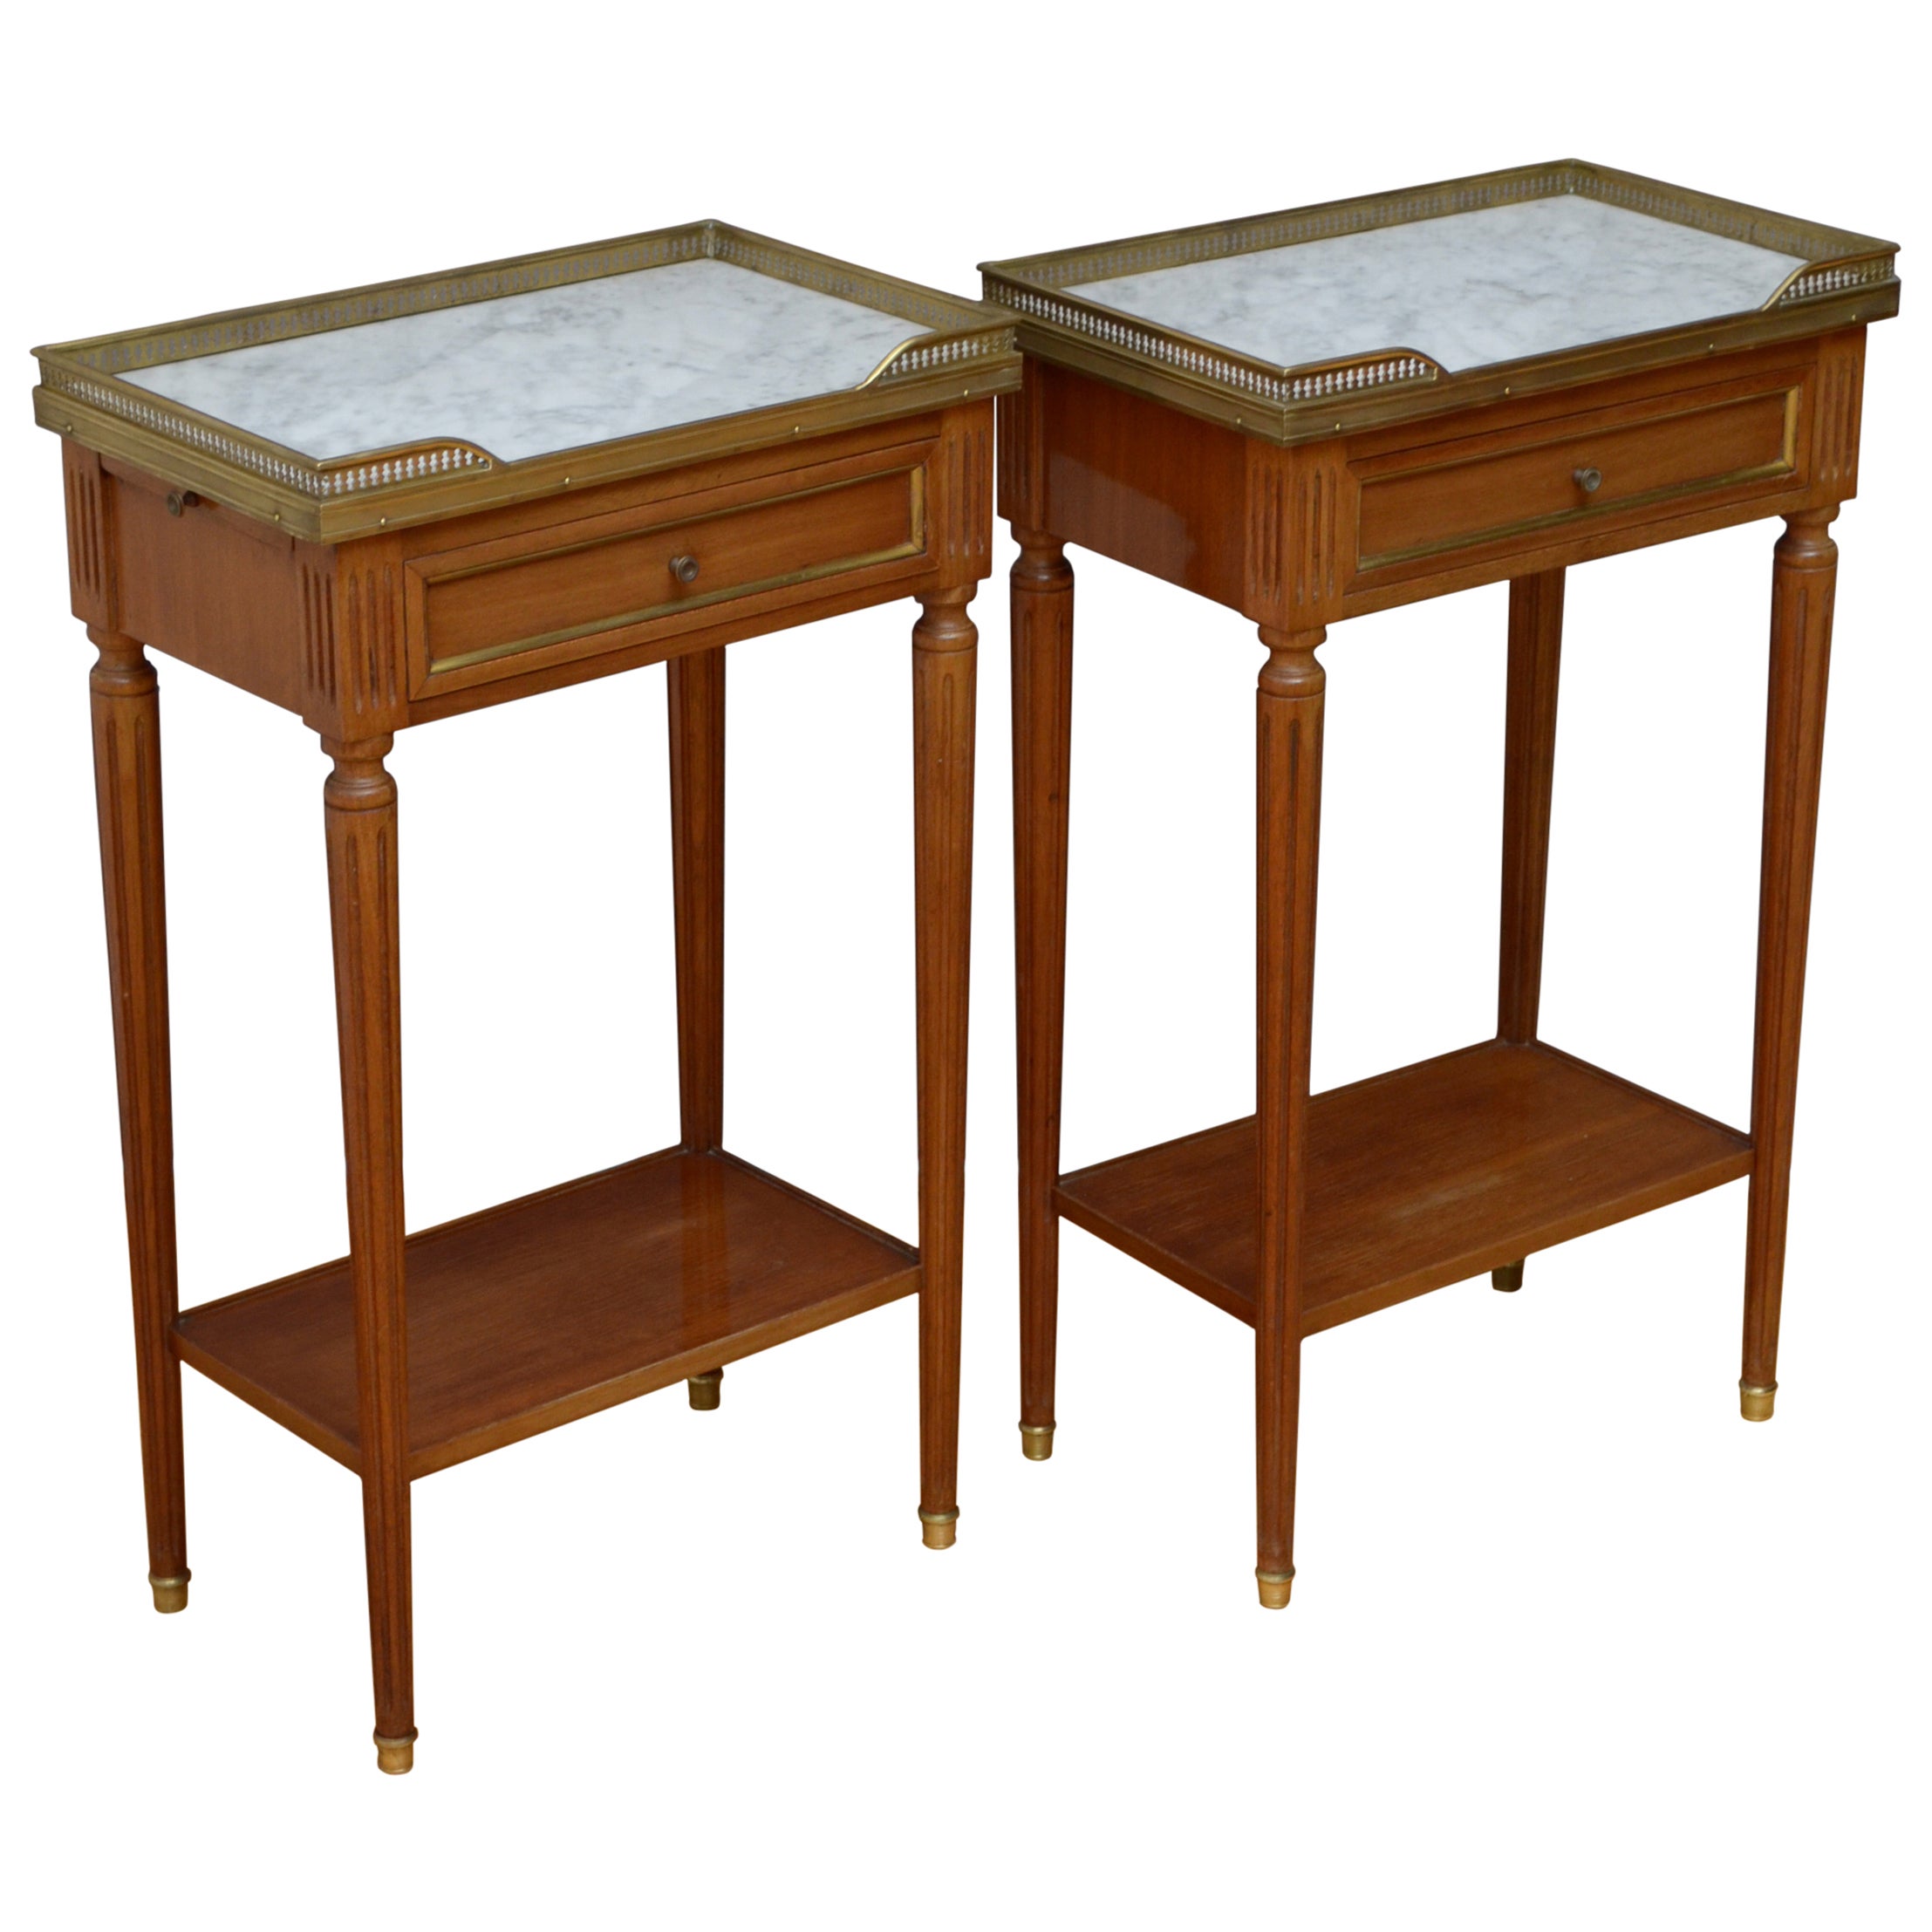 Pair of Antique Mahogany Side Tables or Bedside Tables